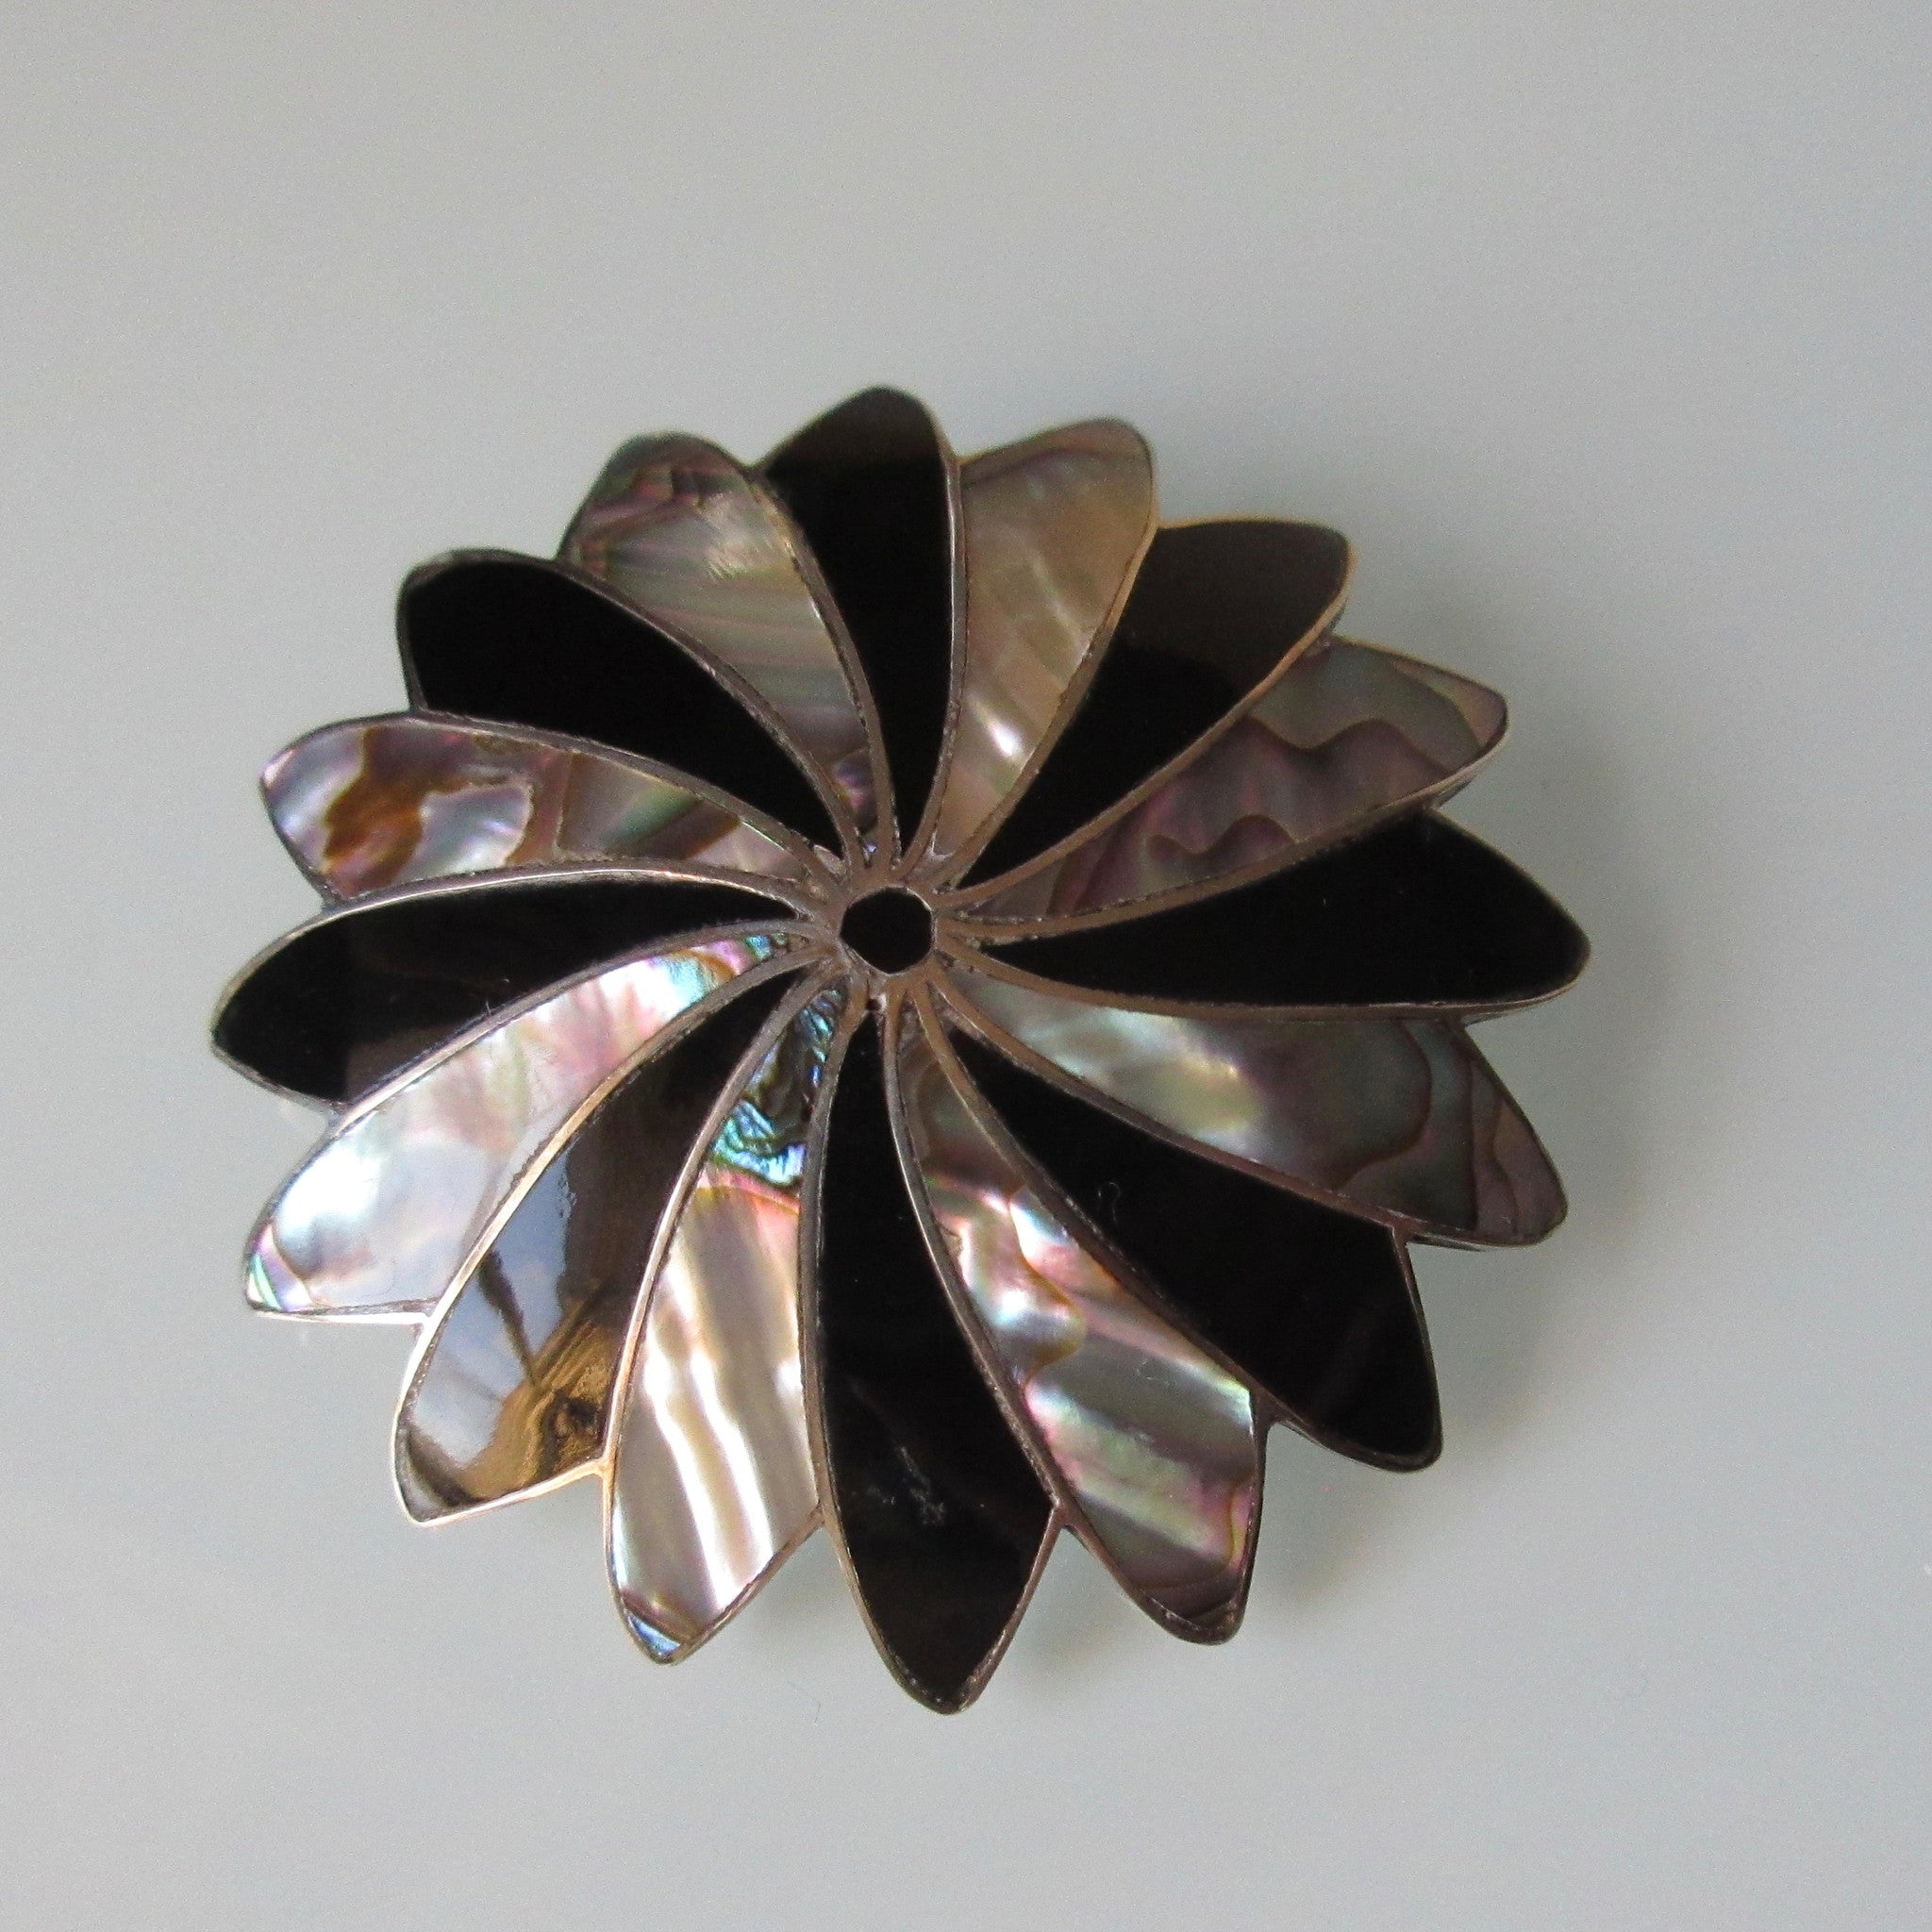 Vintage Mexican Sterling Silver Abalone & Onyx Brooch